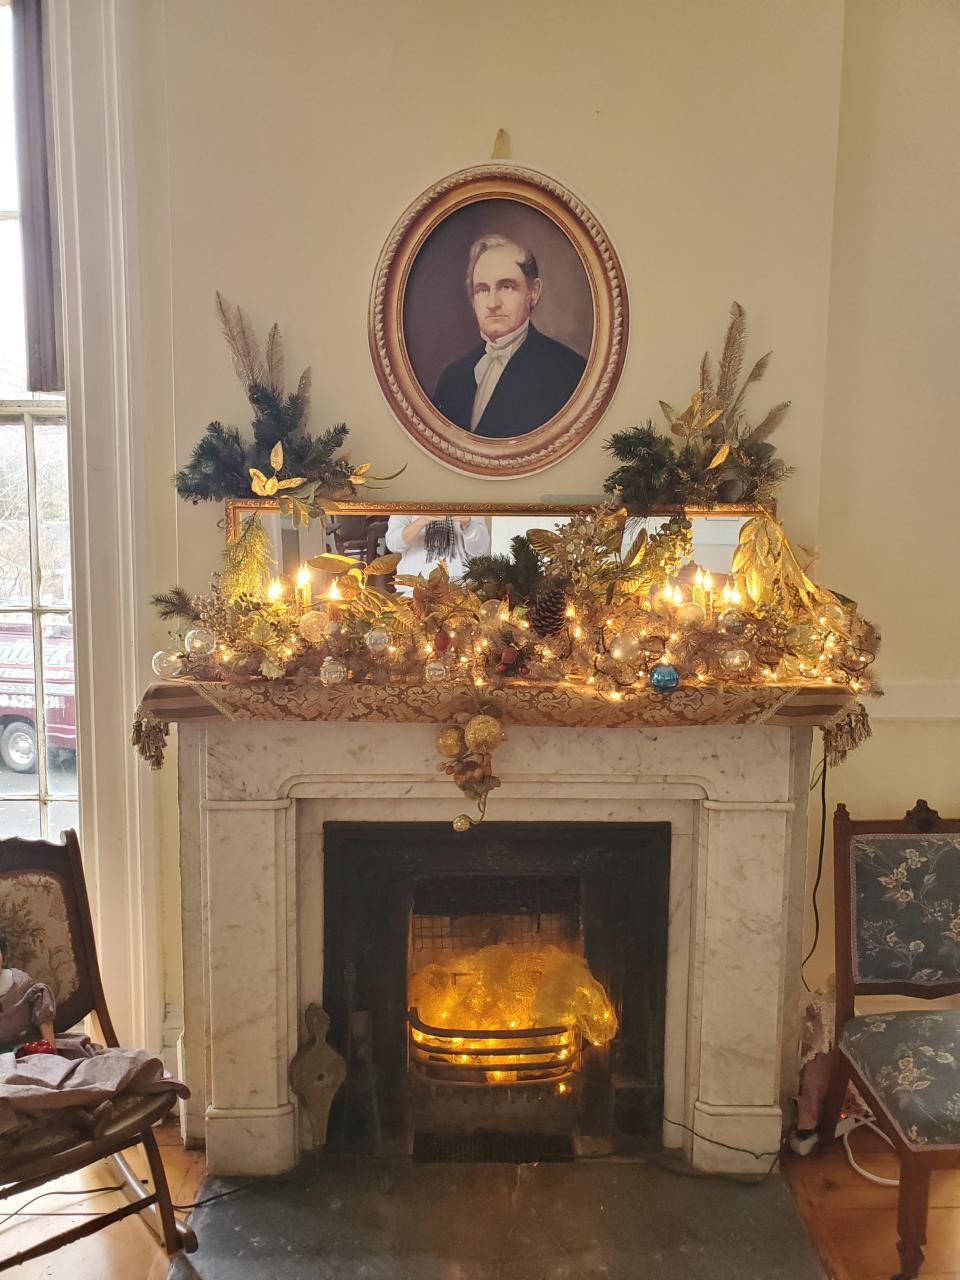 The parlor at Harmony Hall/Jacob Sloat House. The property will be open for its annual holiday festival on Dec. 4, with many new updates for guests.